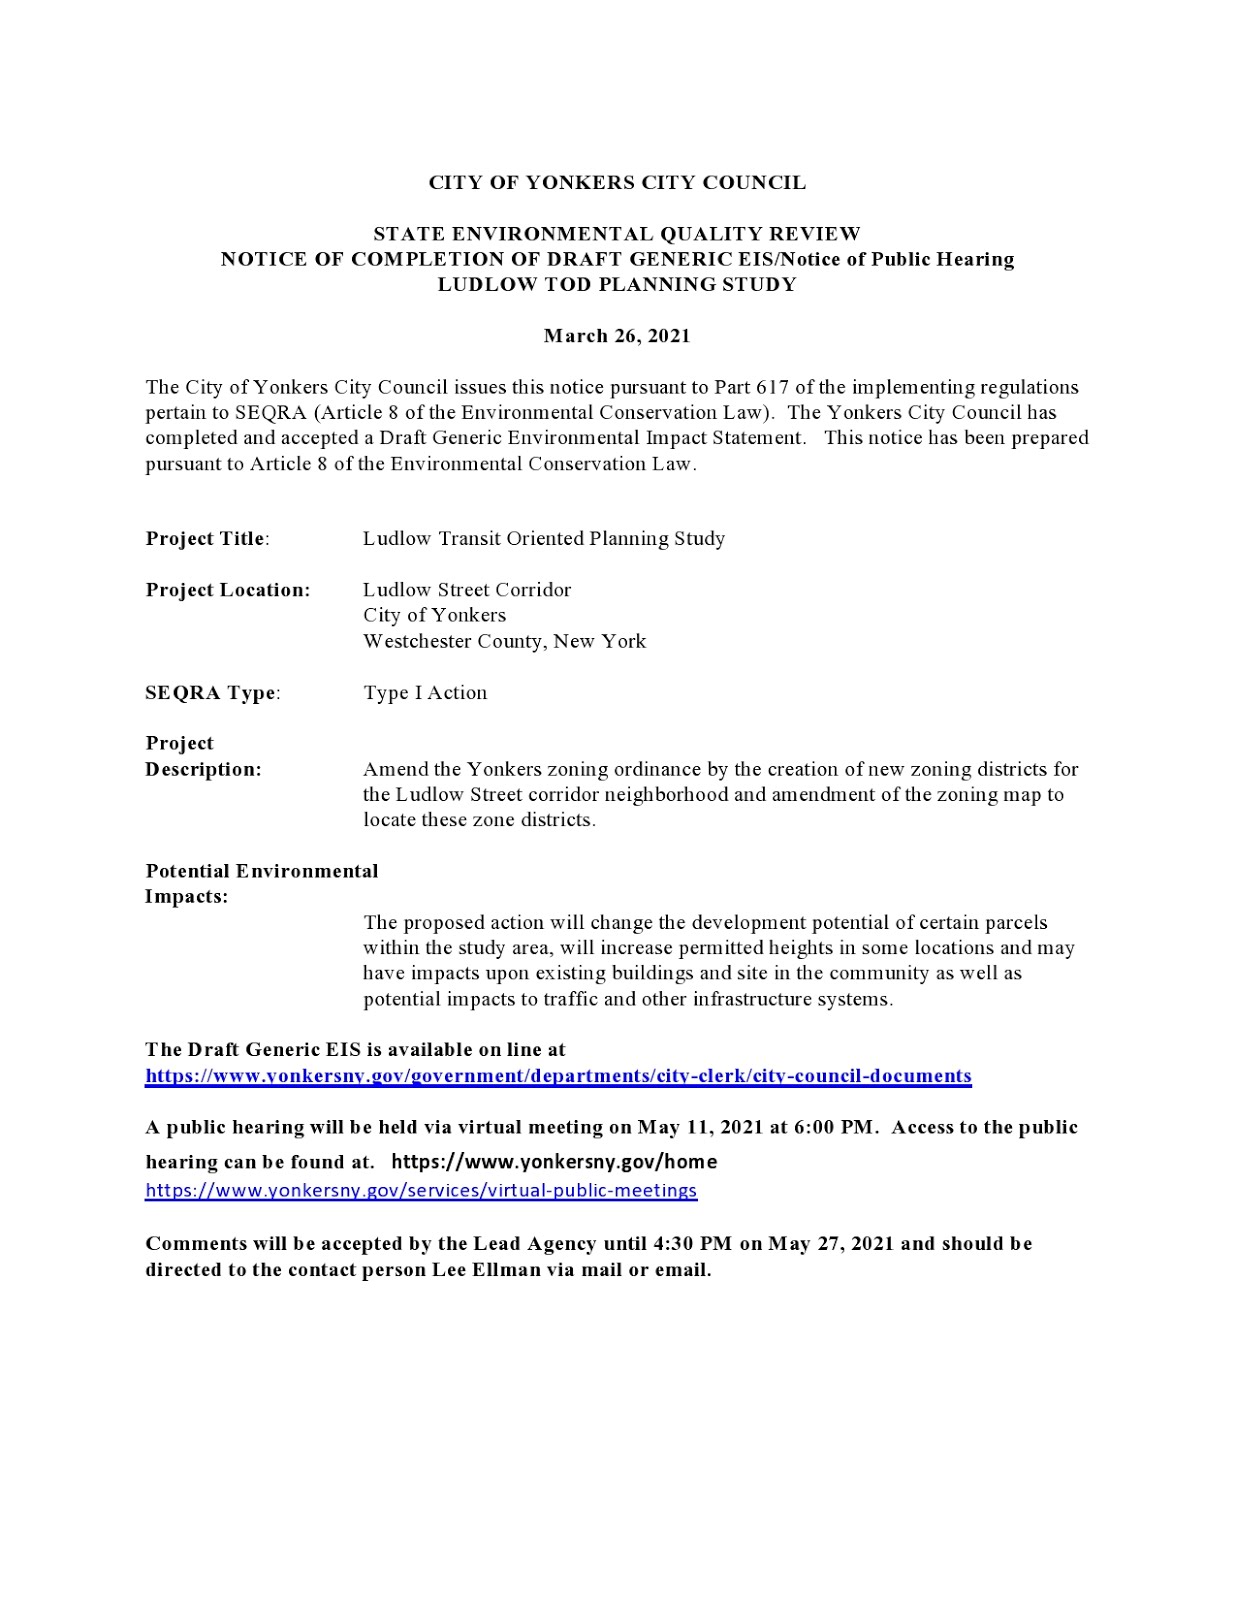 City of Yonkers Legal Notice: NOTICE OF COMPLETION OF DRAFT GENERIC EIS/Notice of Public Hearing.